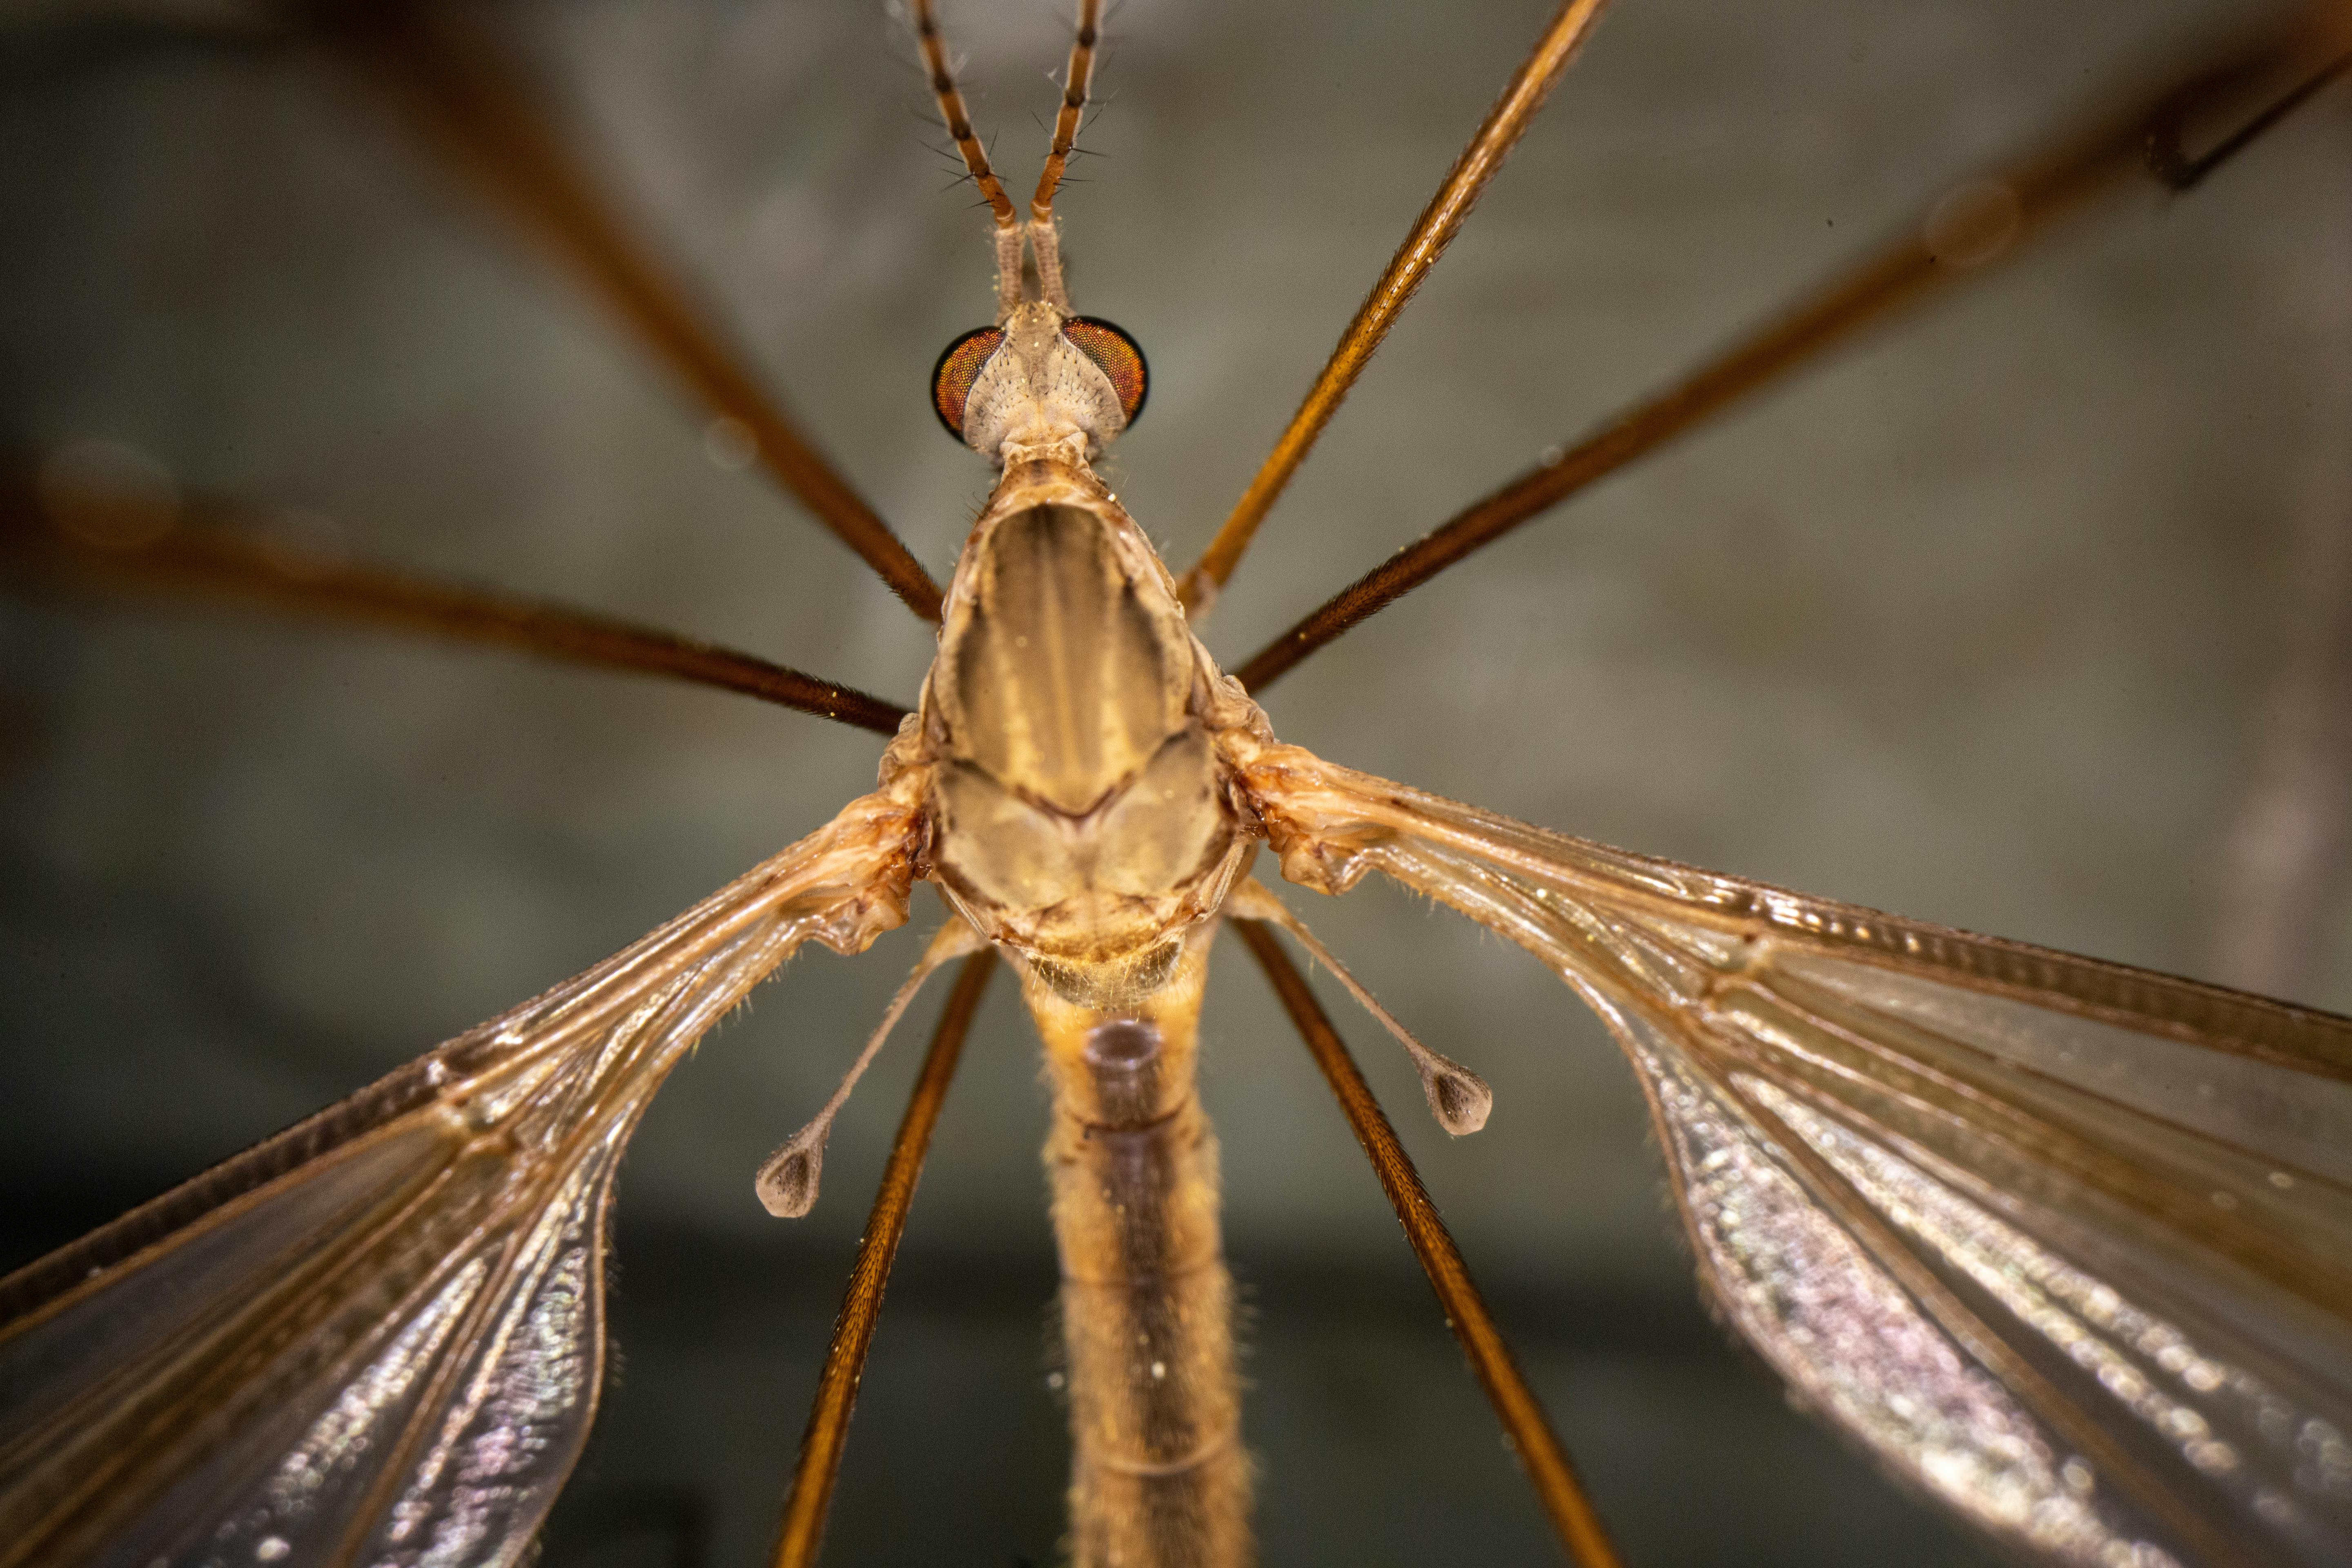 Crane fly with shiny wings and long legs, a common sight in residential areas